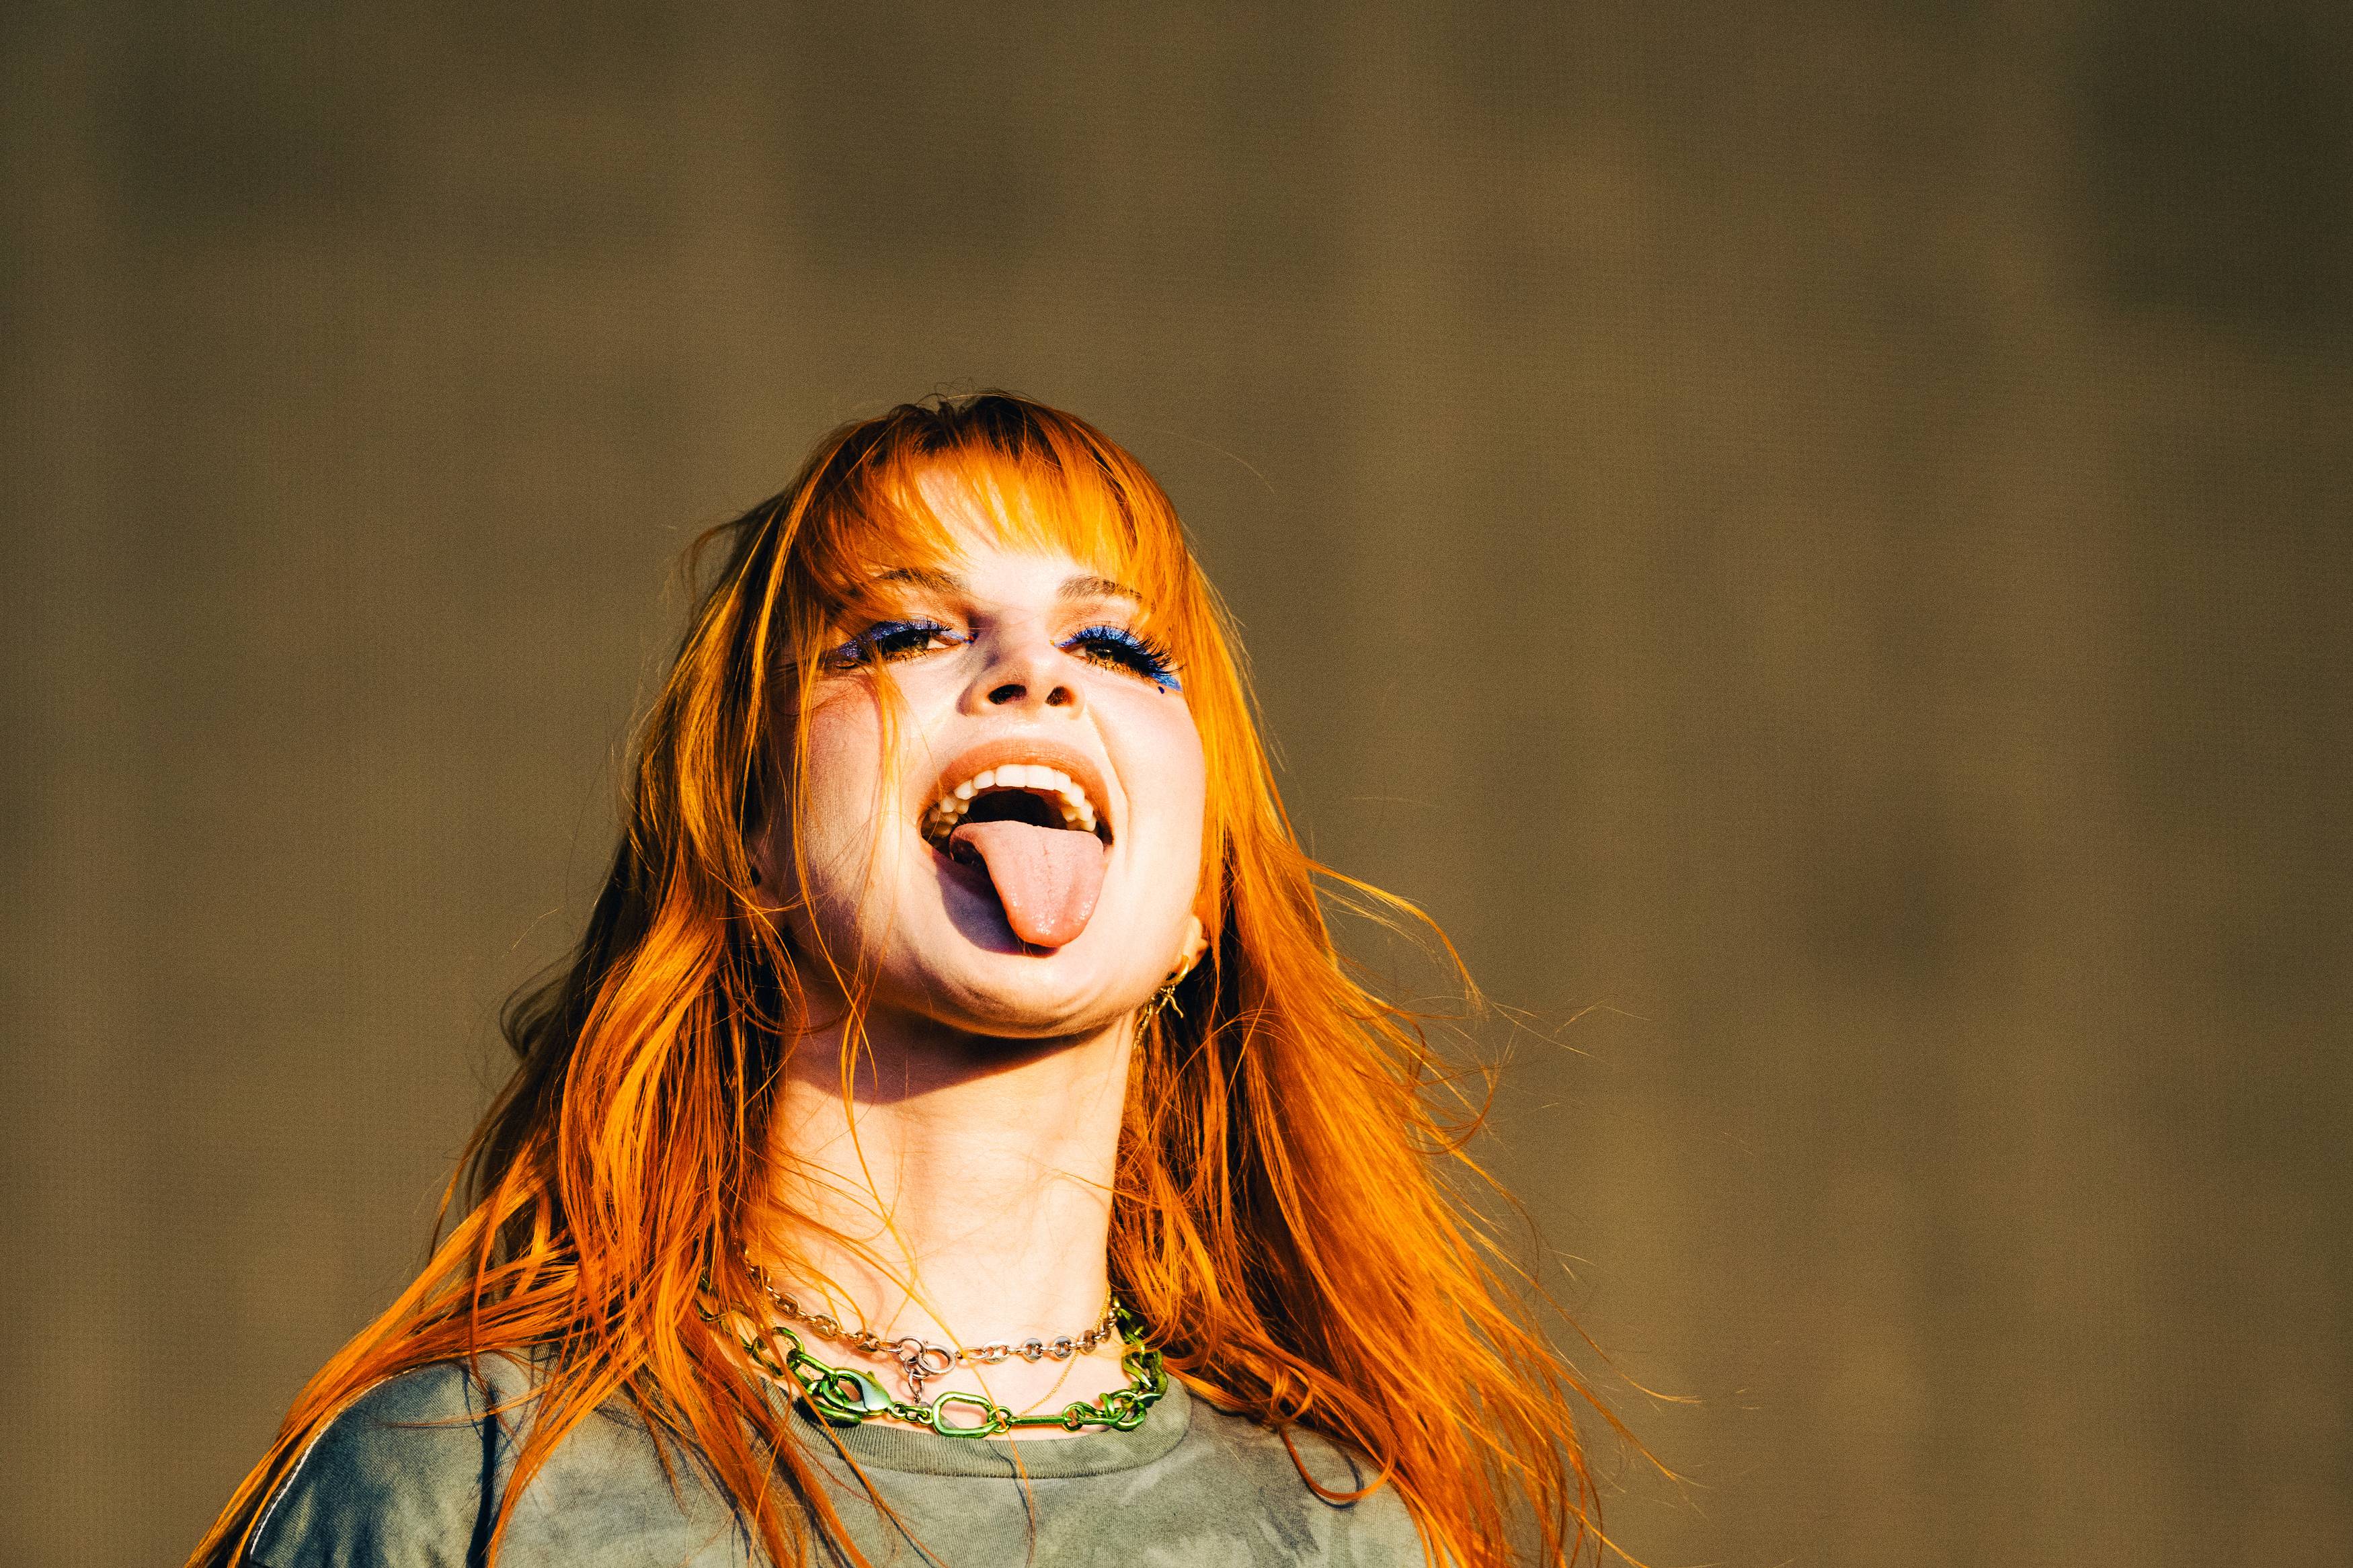 Hayley Williams of Paramore performing at the 2022 Austin City Limits Festival.